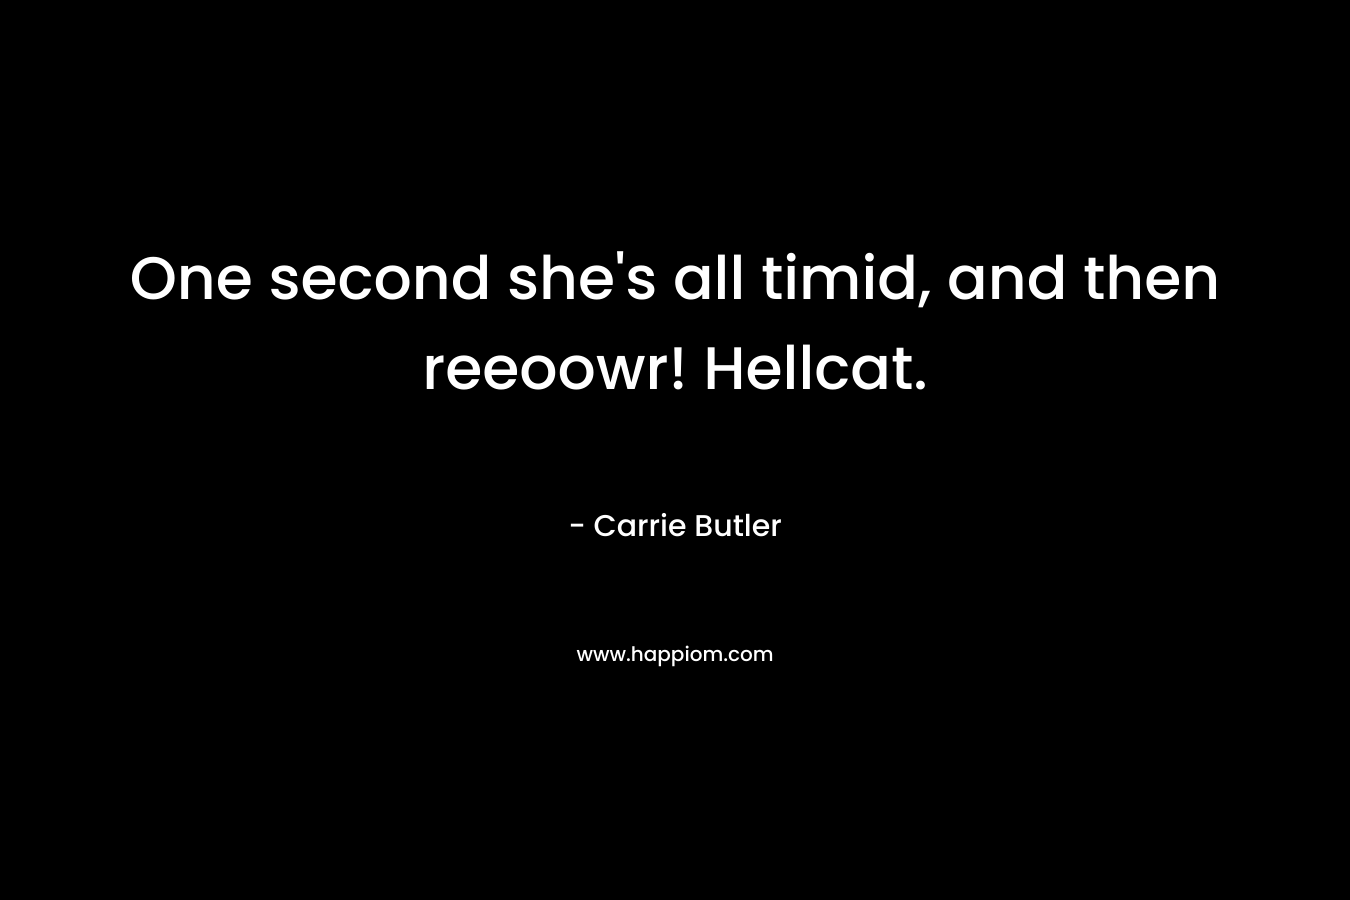 One second she’s all timid, and then reeoowr! Hellcat. – Carrie Butler